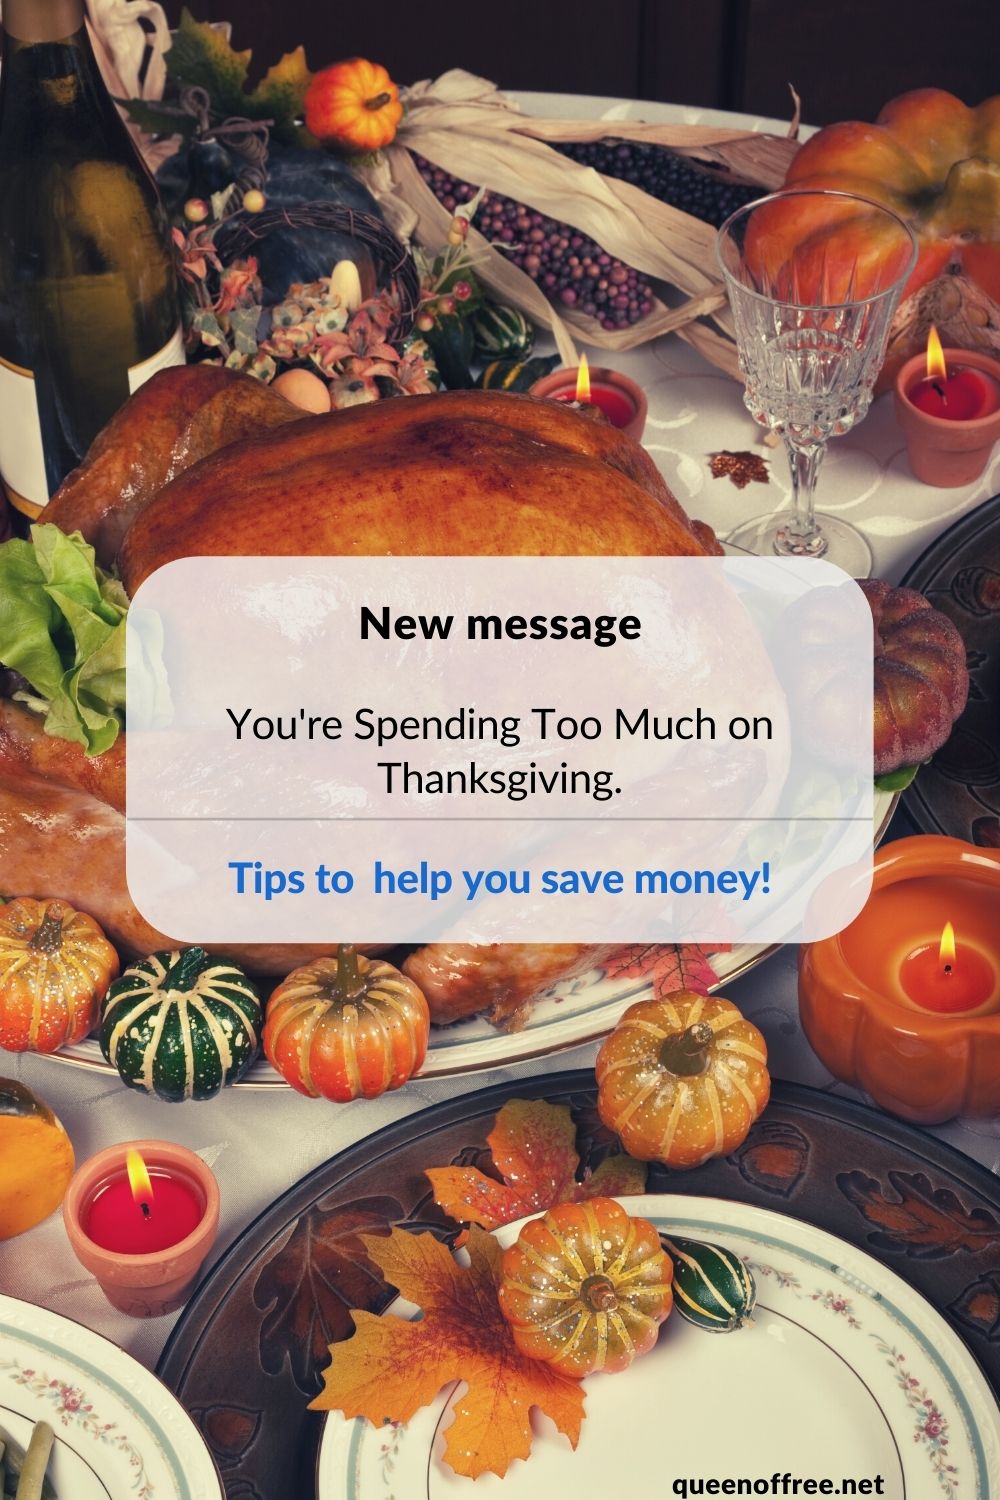 Stop overspending, STAT. Save Money on Thanksgiving 2023 with these smart and simple tips for your feast.